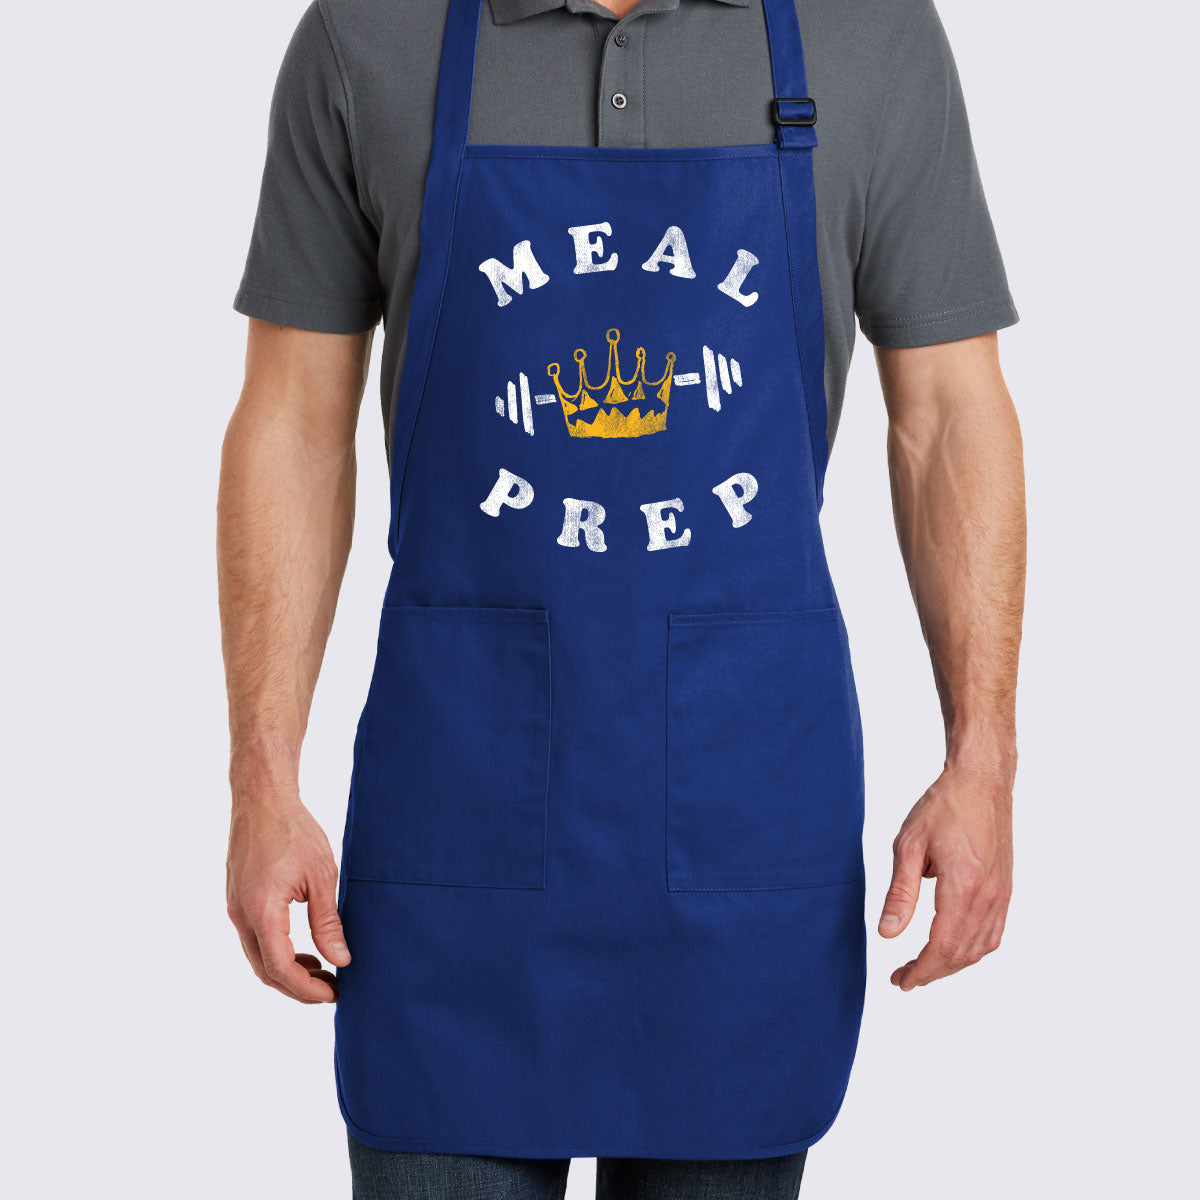 Meal Prep King Full-Length Apron with Pockets